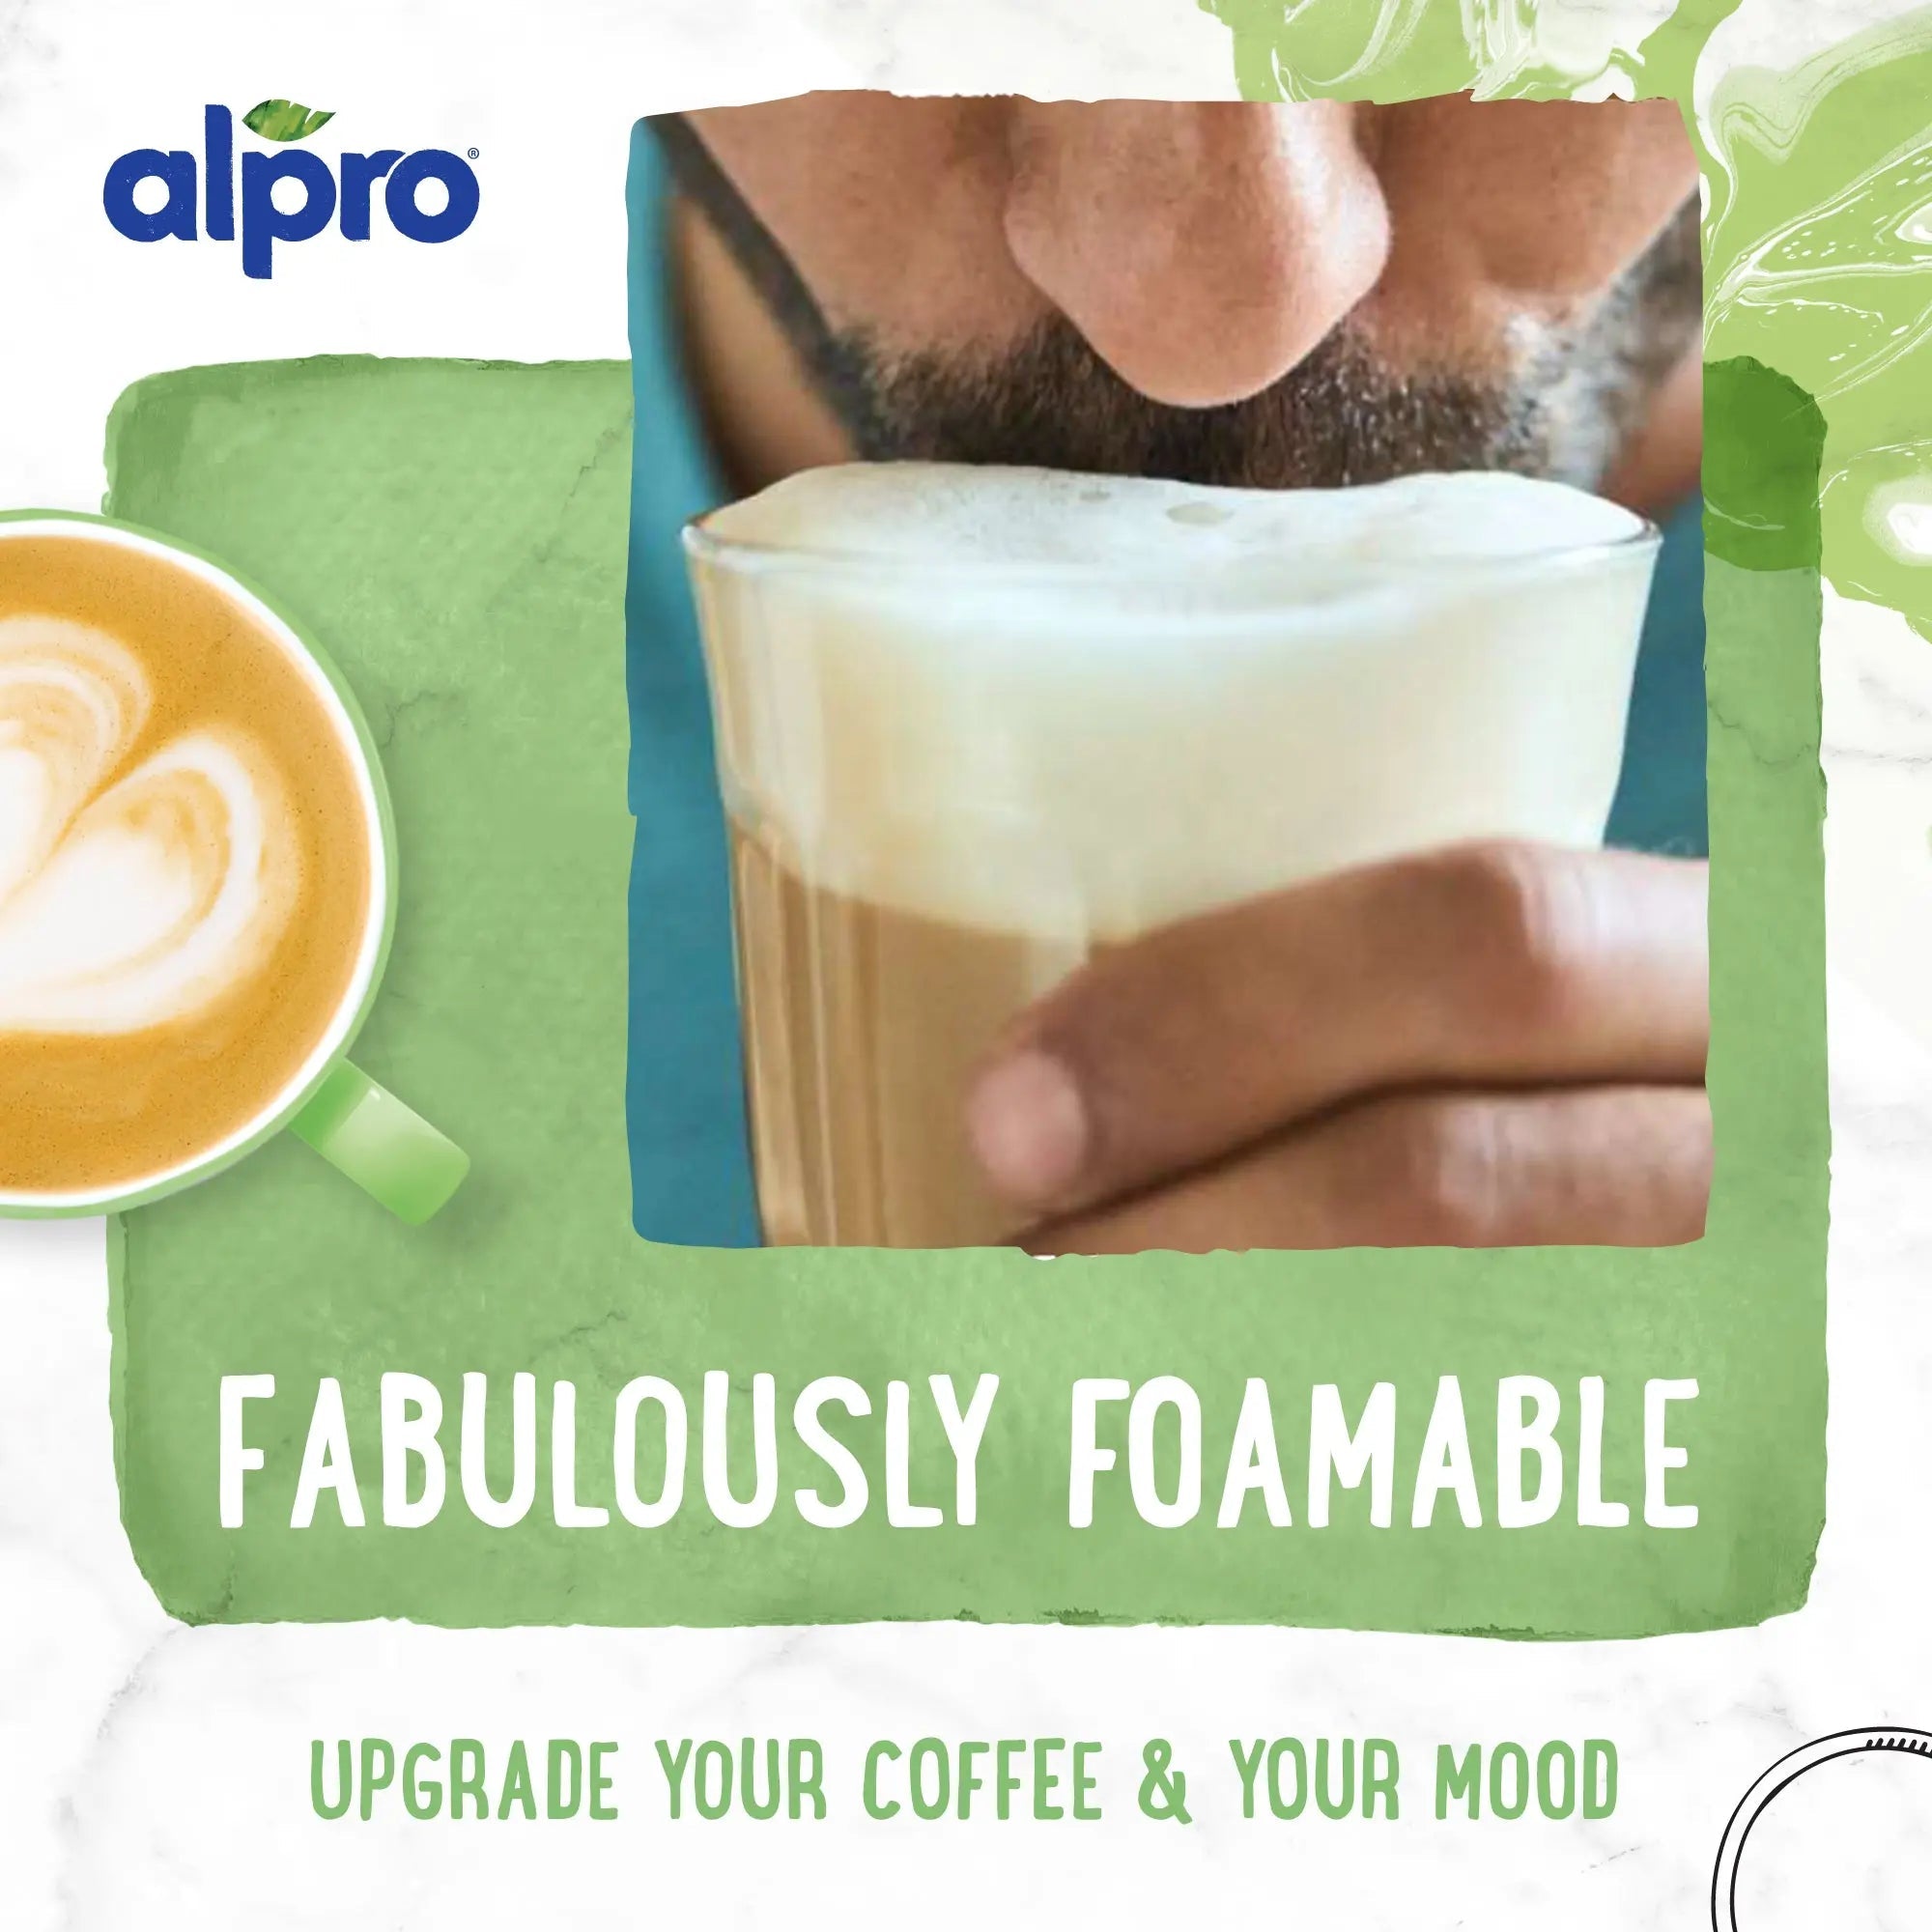 Alpro Barista  ☕️ Alpro Barista is the perfect partner to your